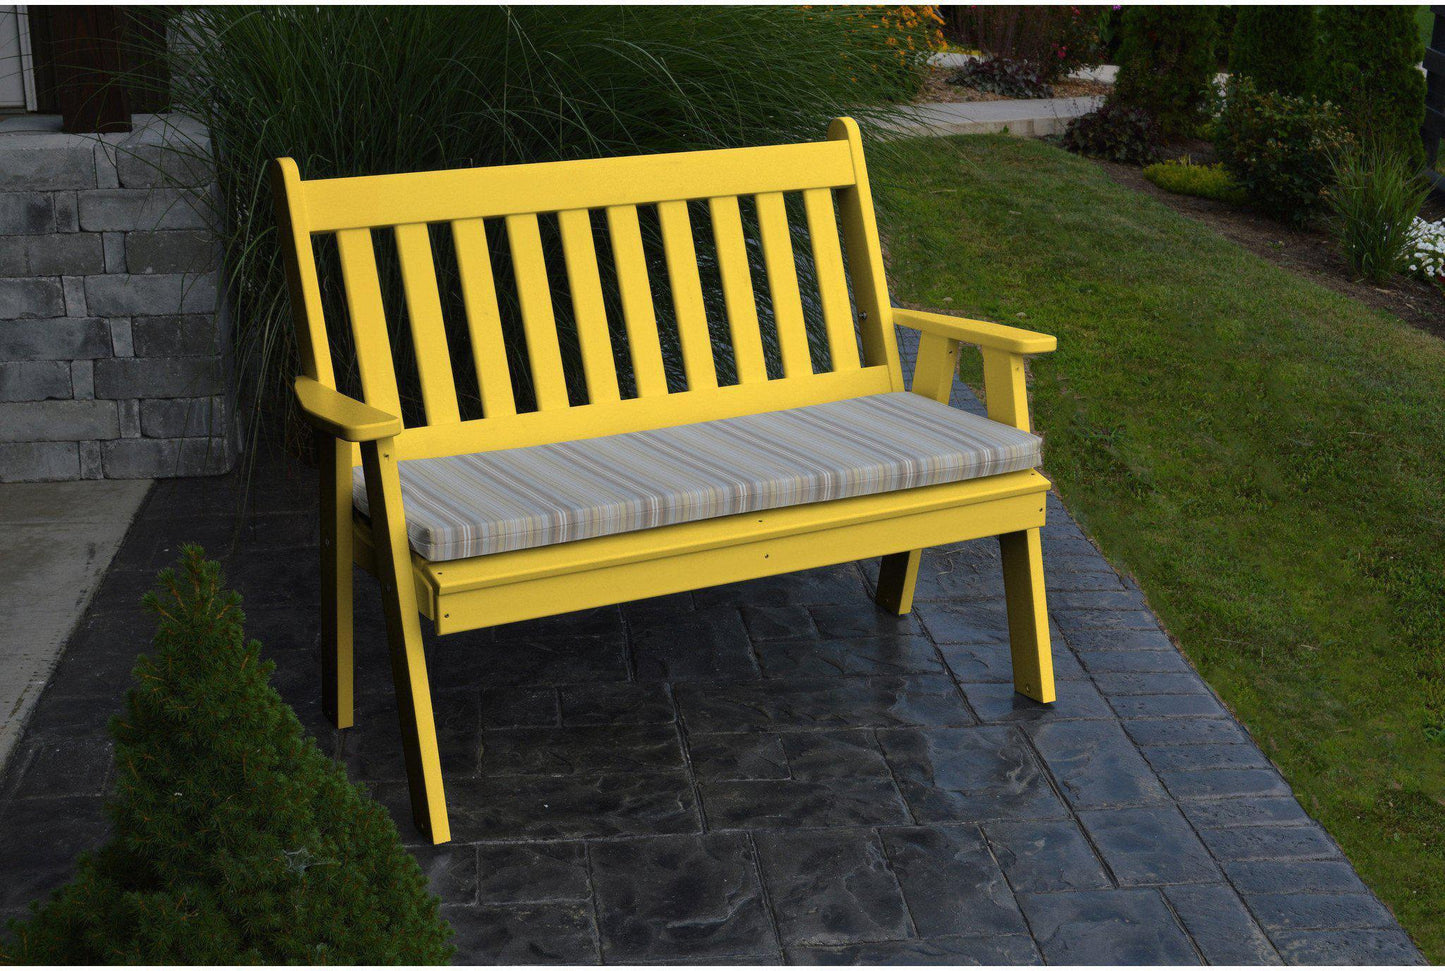 Outdoor Bench - A&L Furniture Company Recycled Plastic 4' Traditional English Garden Bench